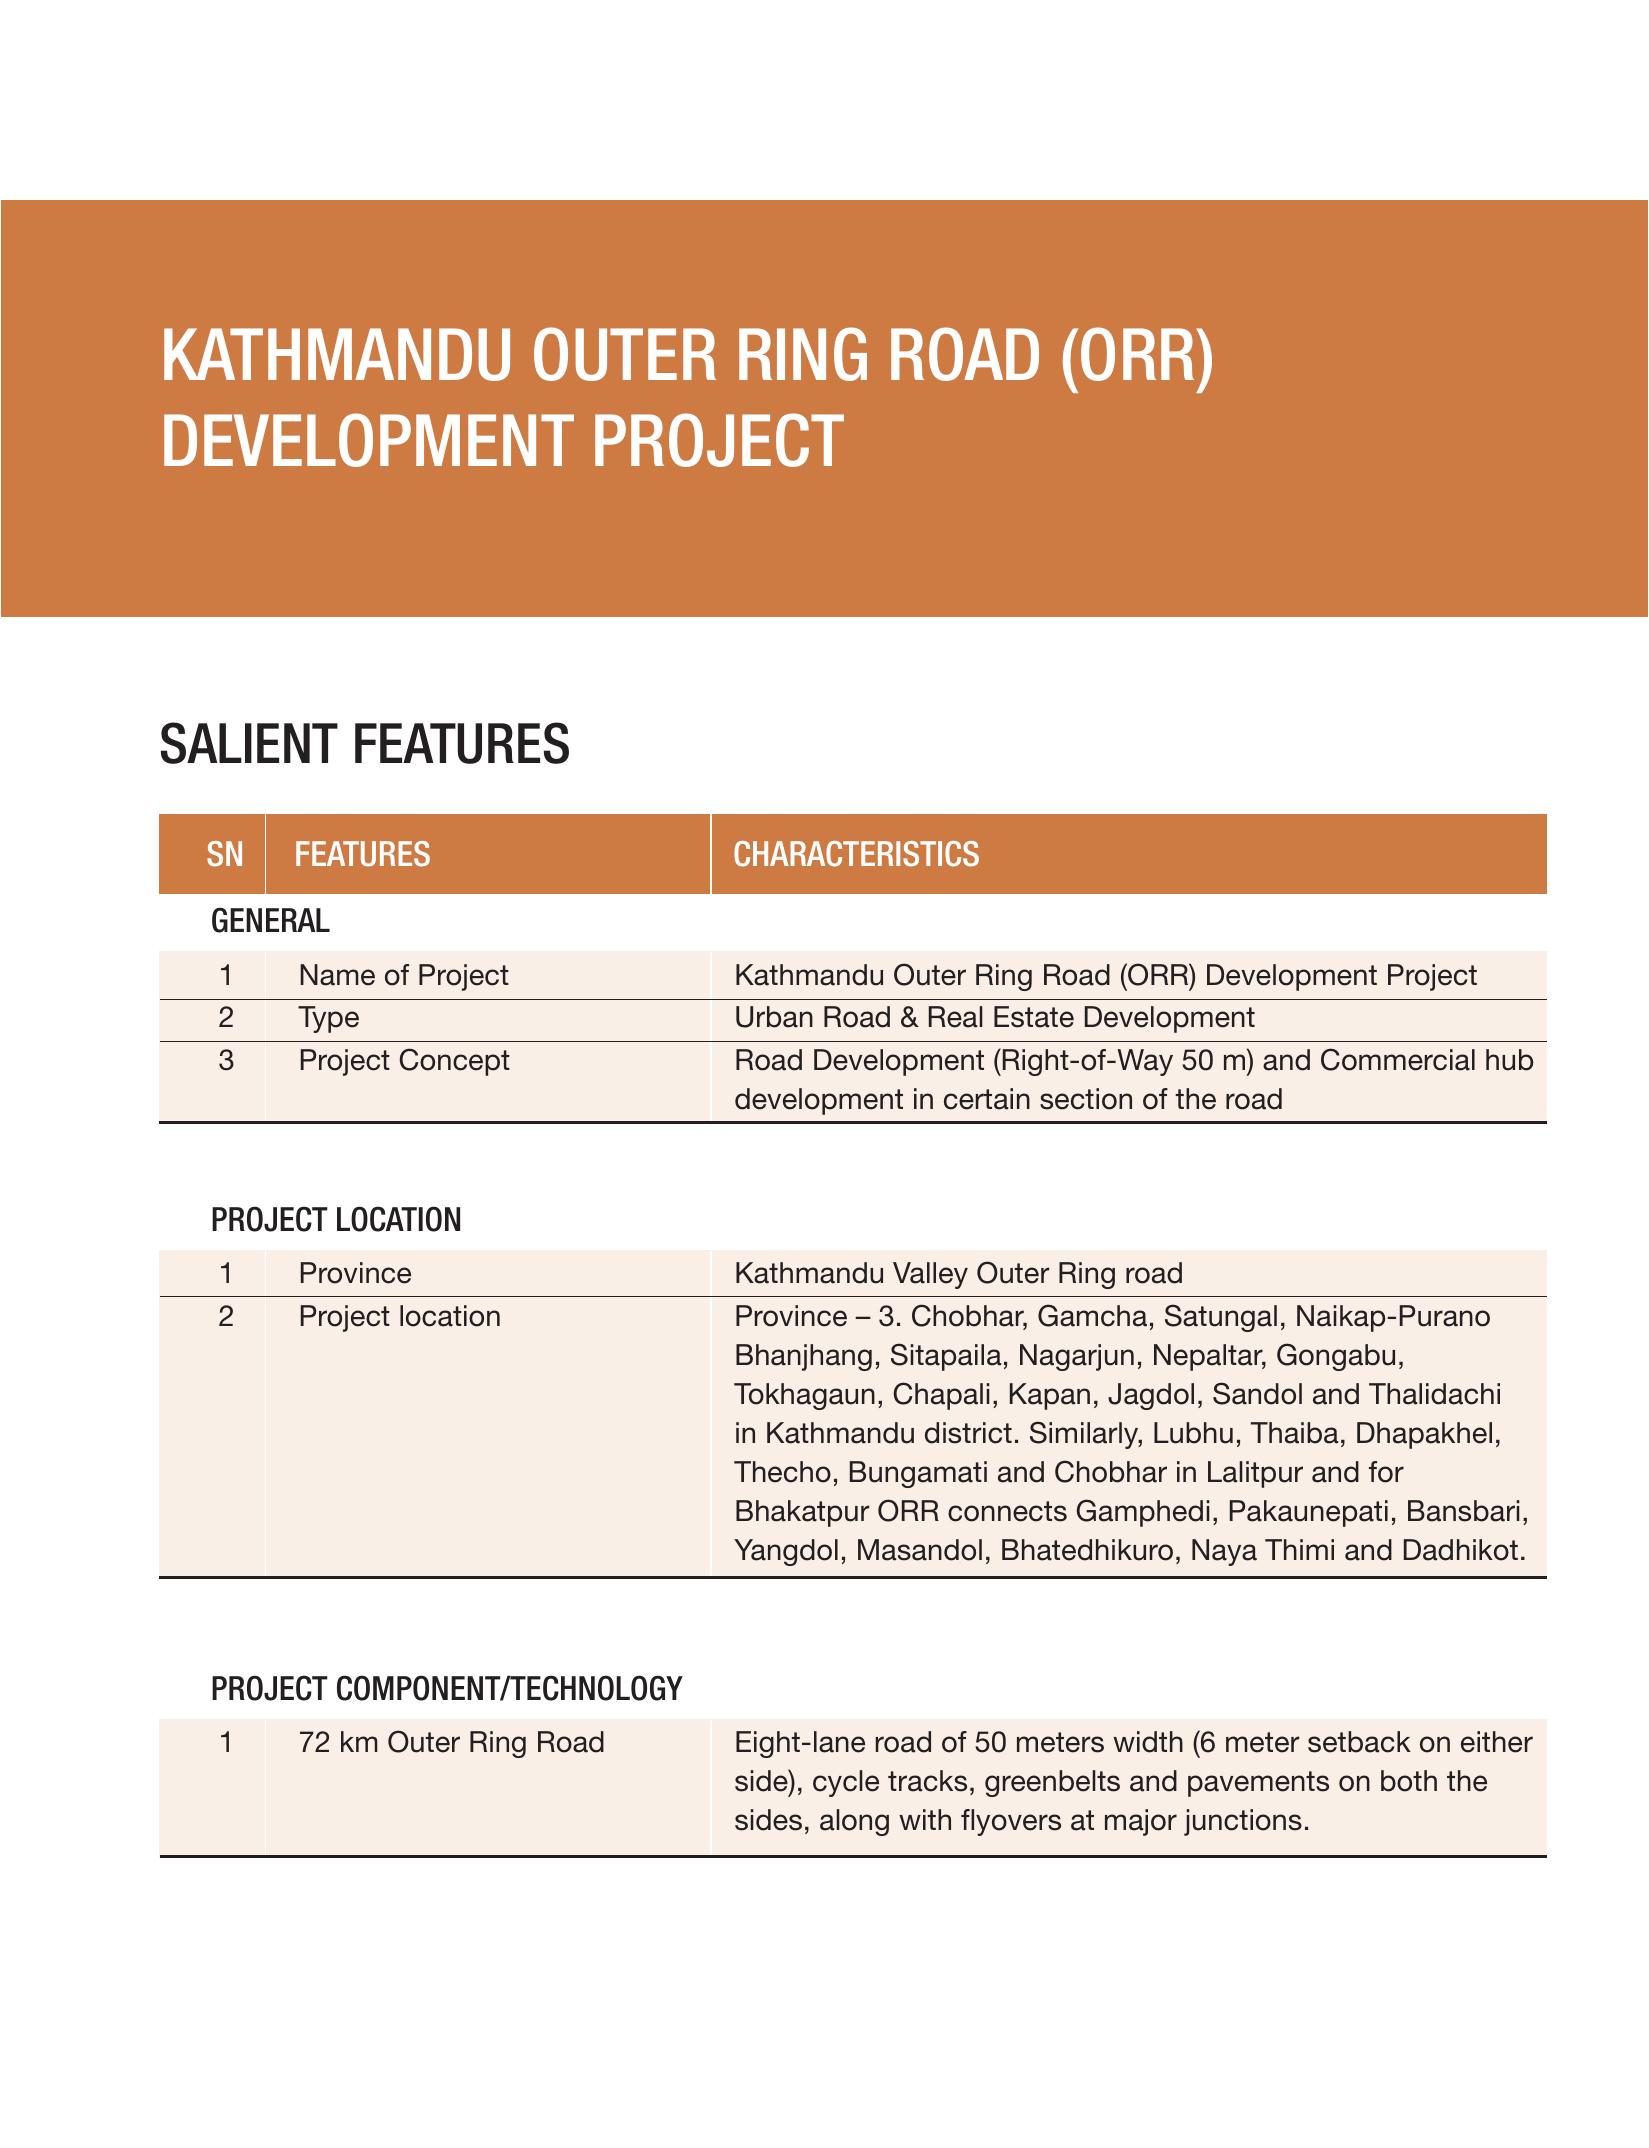 KATHMANDU OUTER RING ROAD (ORR) DEVELOPMENT PROJECT| Resources